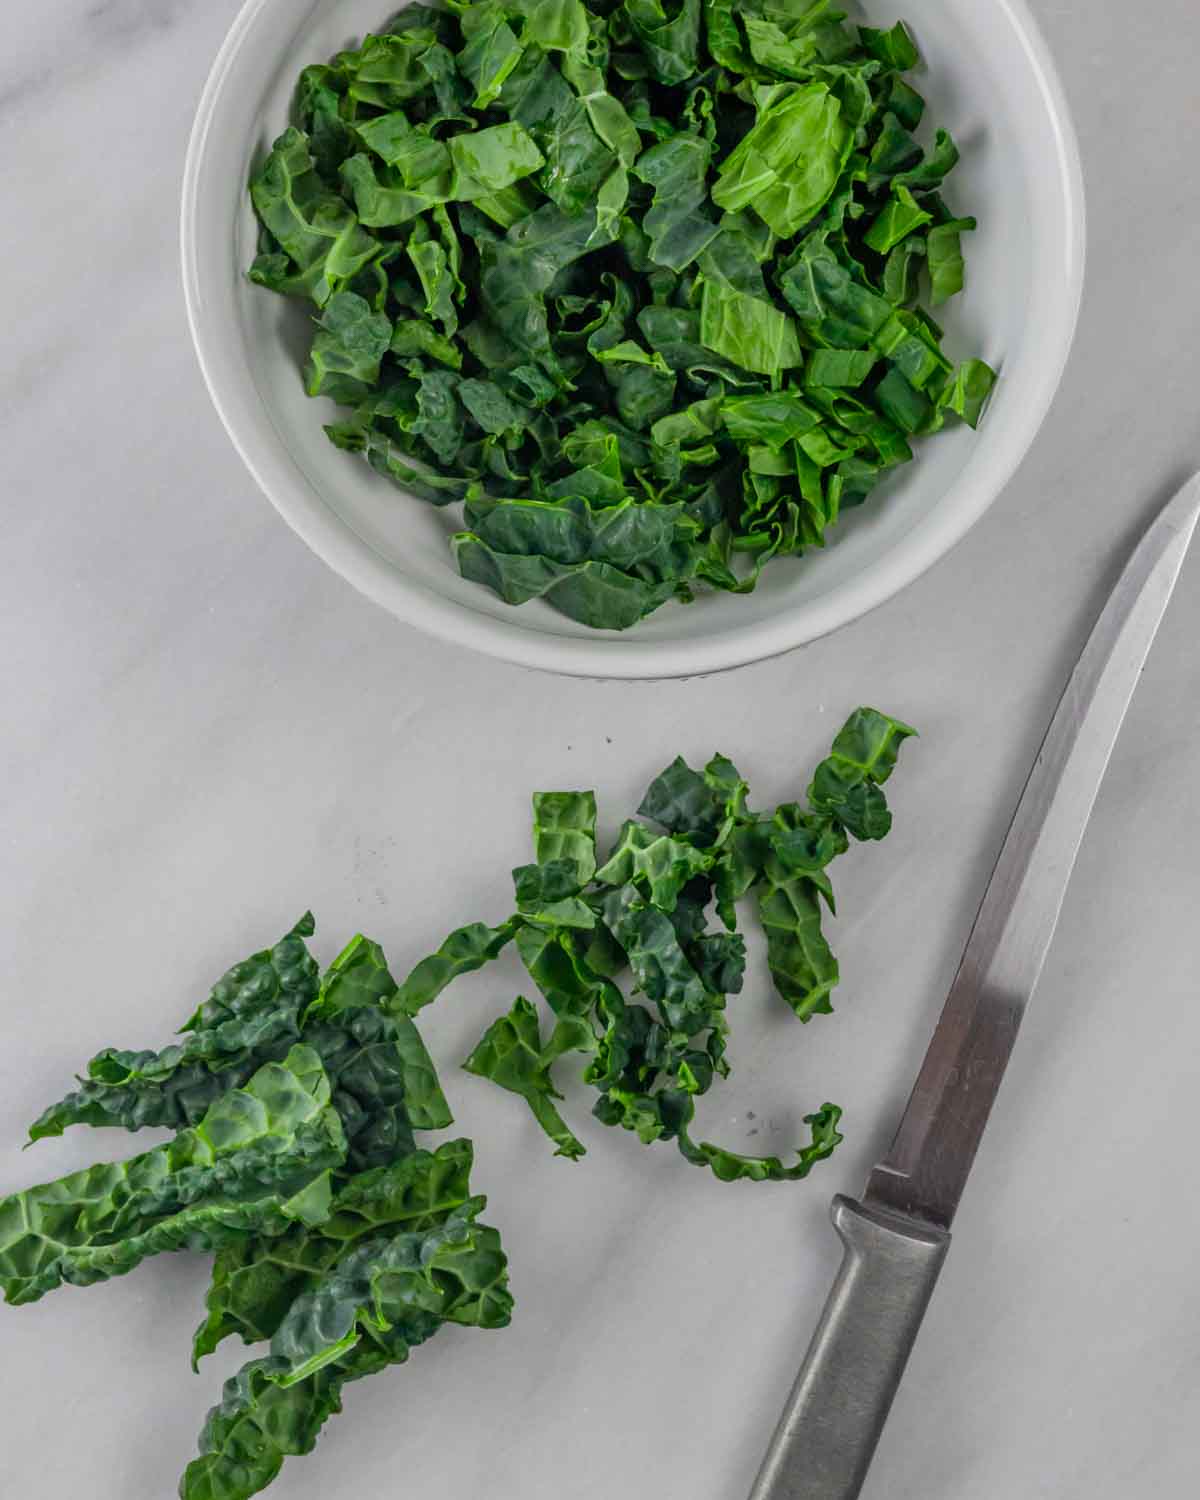 Chopped kale on cutting board with knife and bowl of kale.